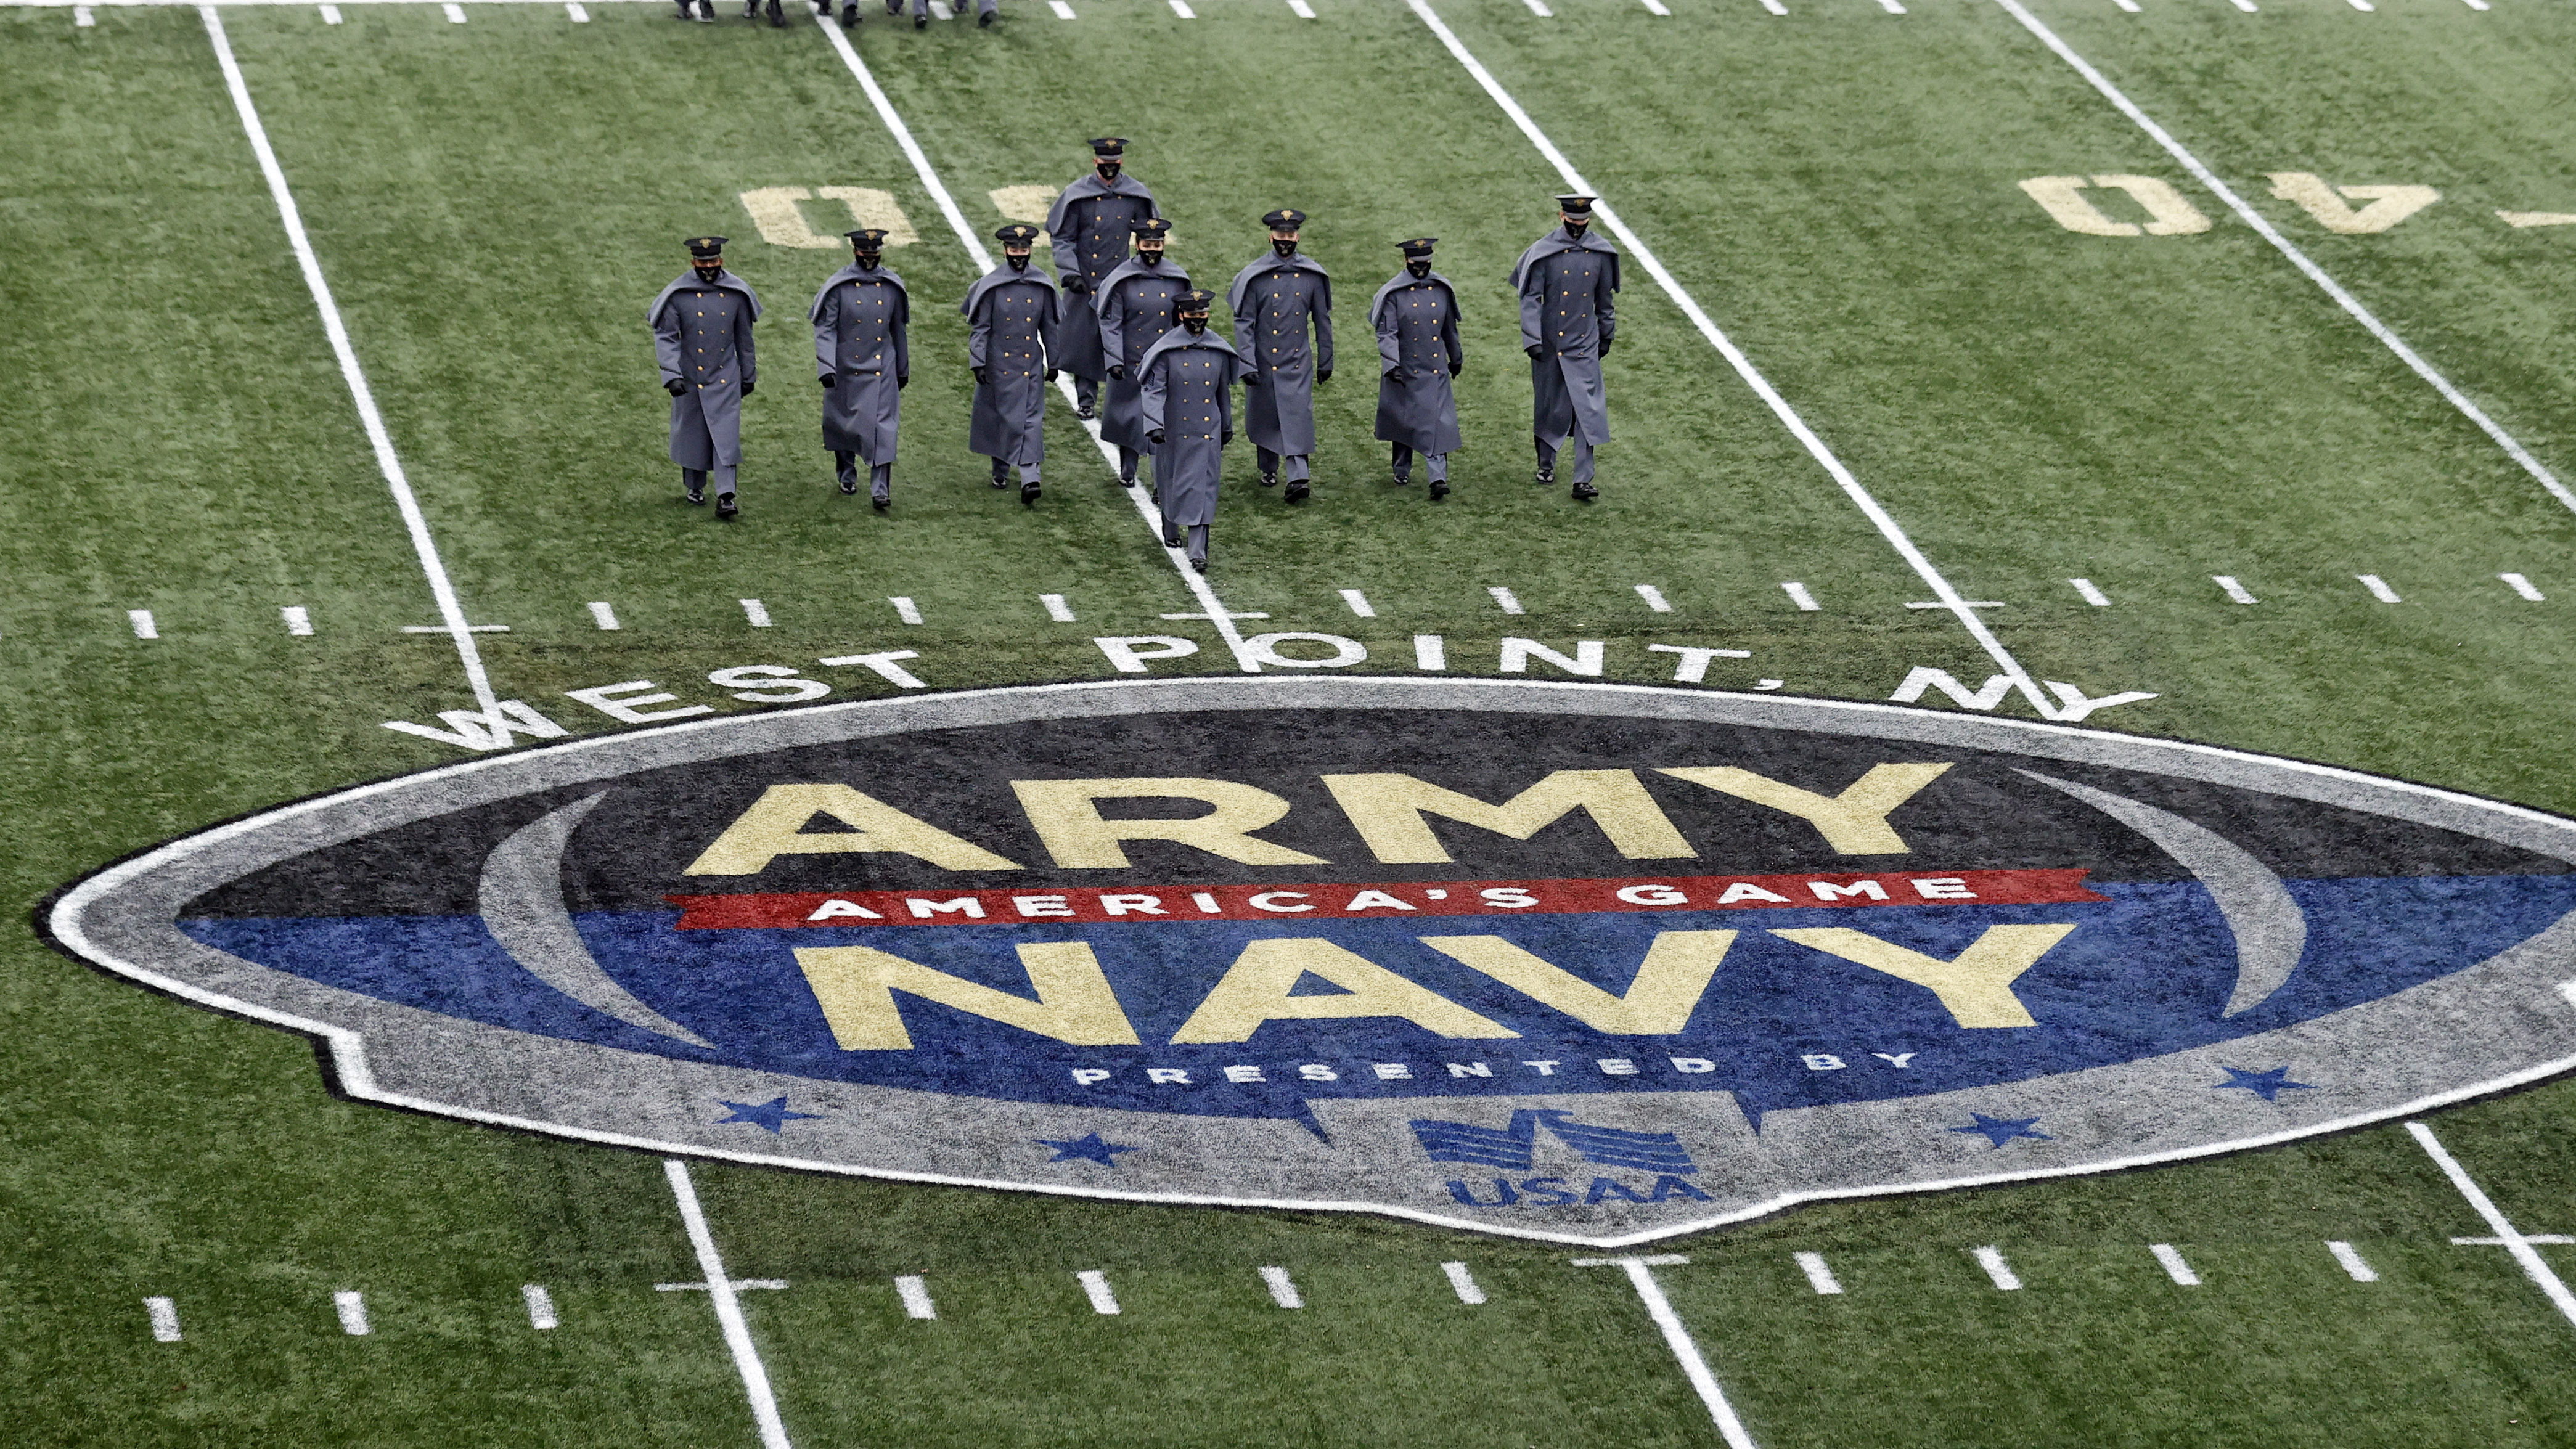 How to buy tickets for Army-Navy game in N.J